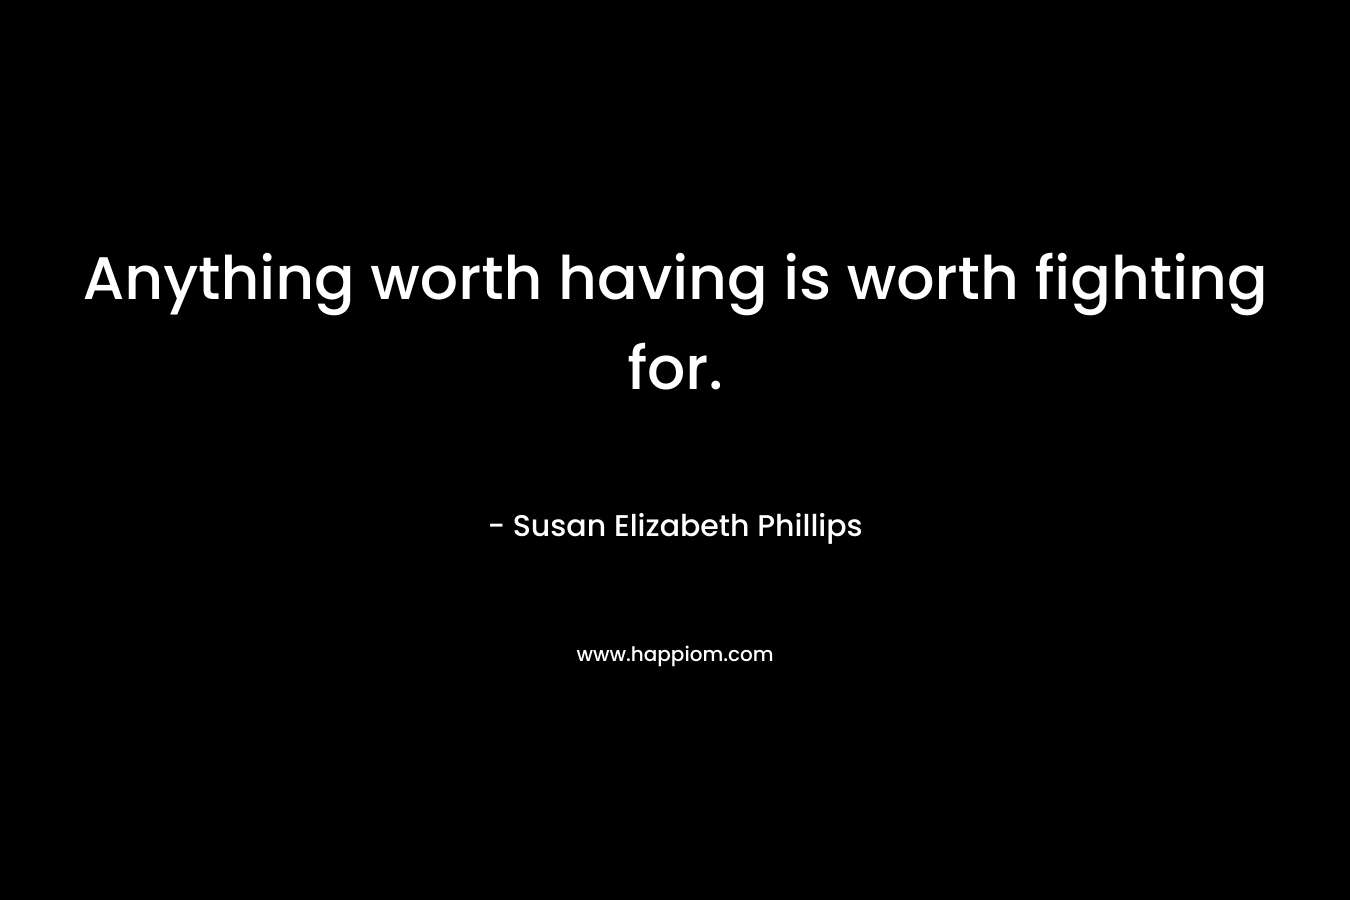 Anything worth having is worth fighting for.